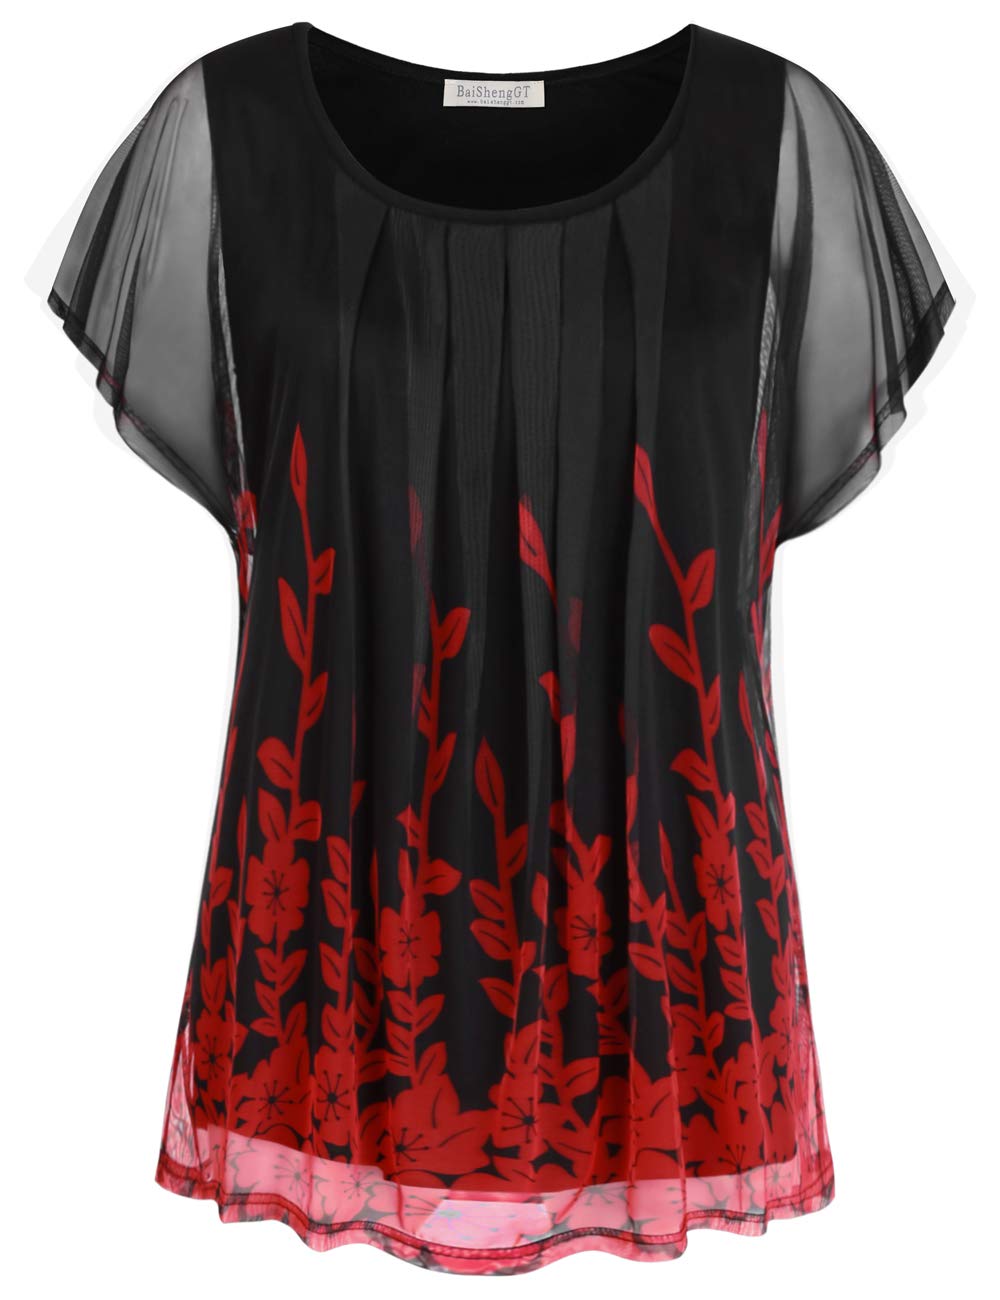 BAISHENGGT Womens Red Floral Flouncing Flared Short Sleeve Pleated Front Mesh Blouses Tops